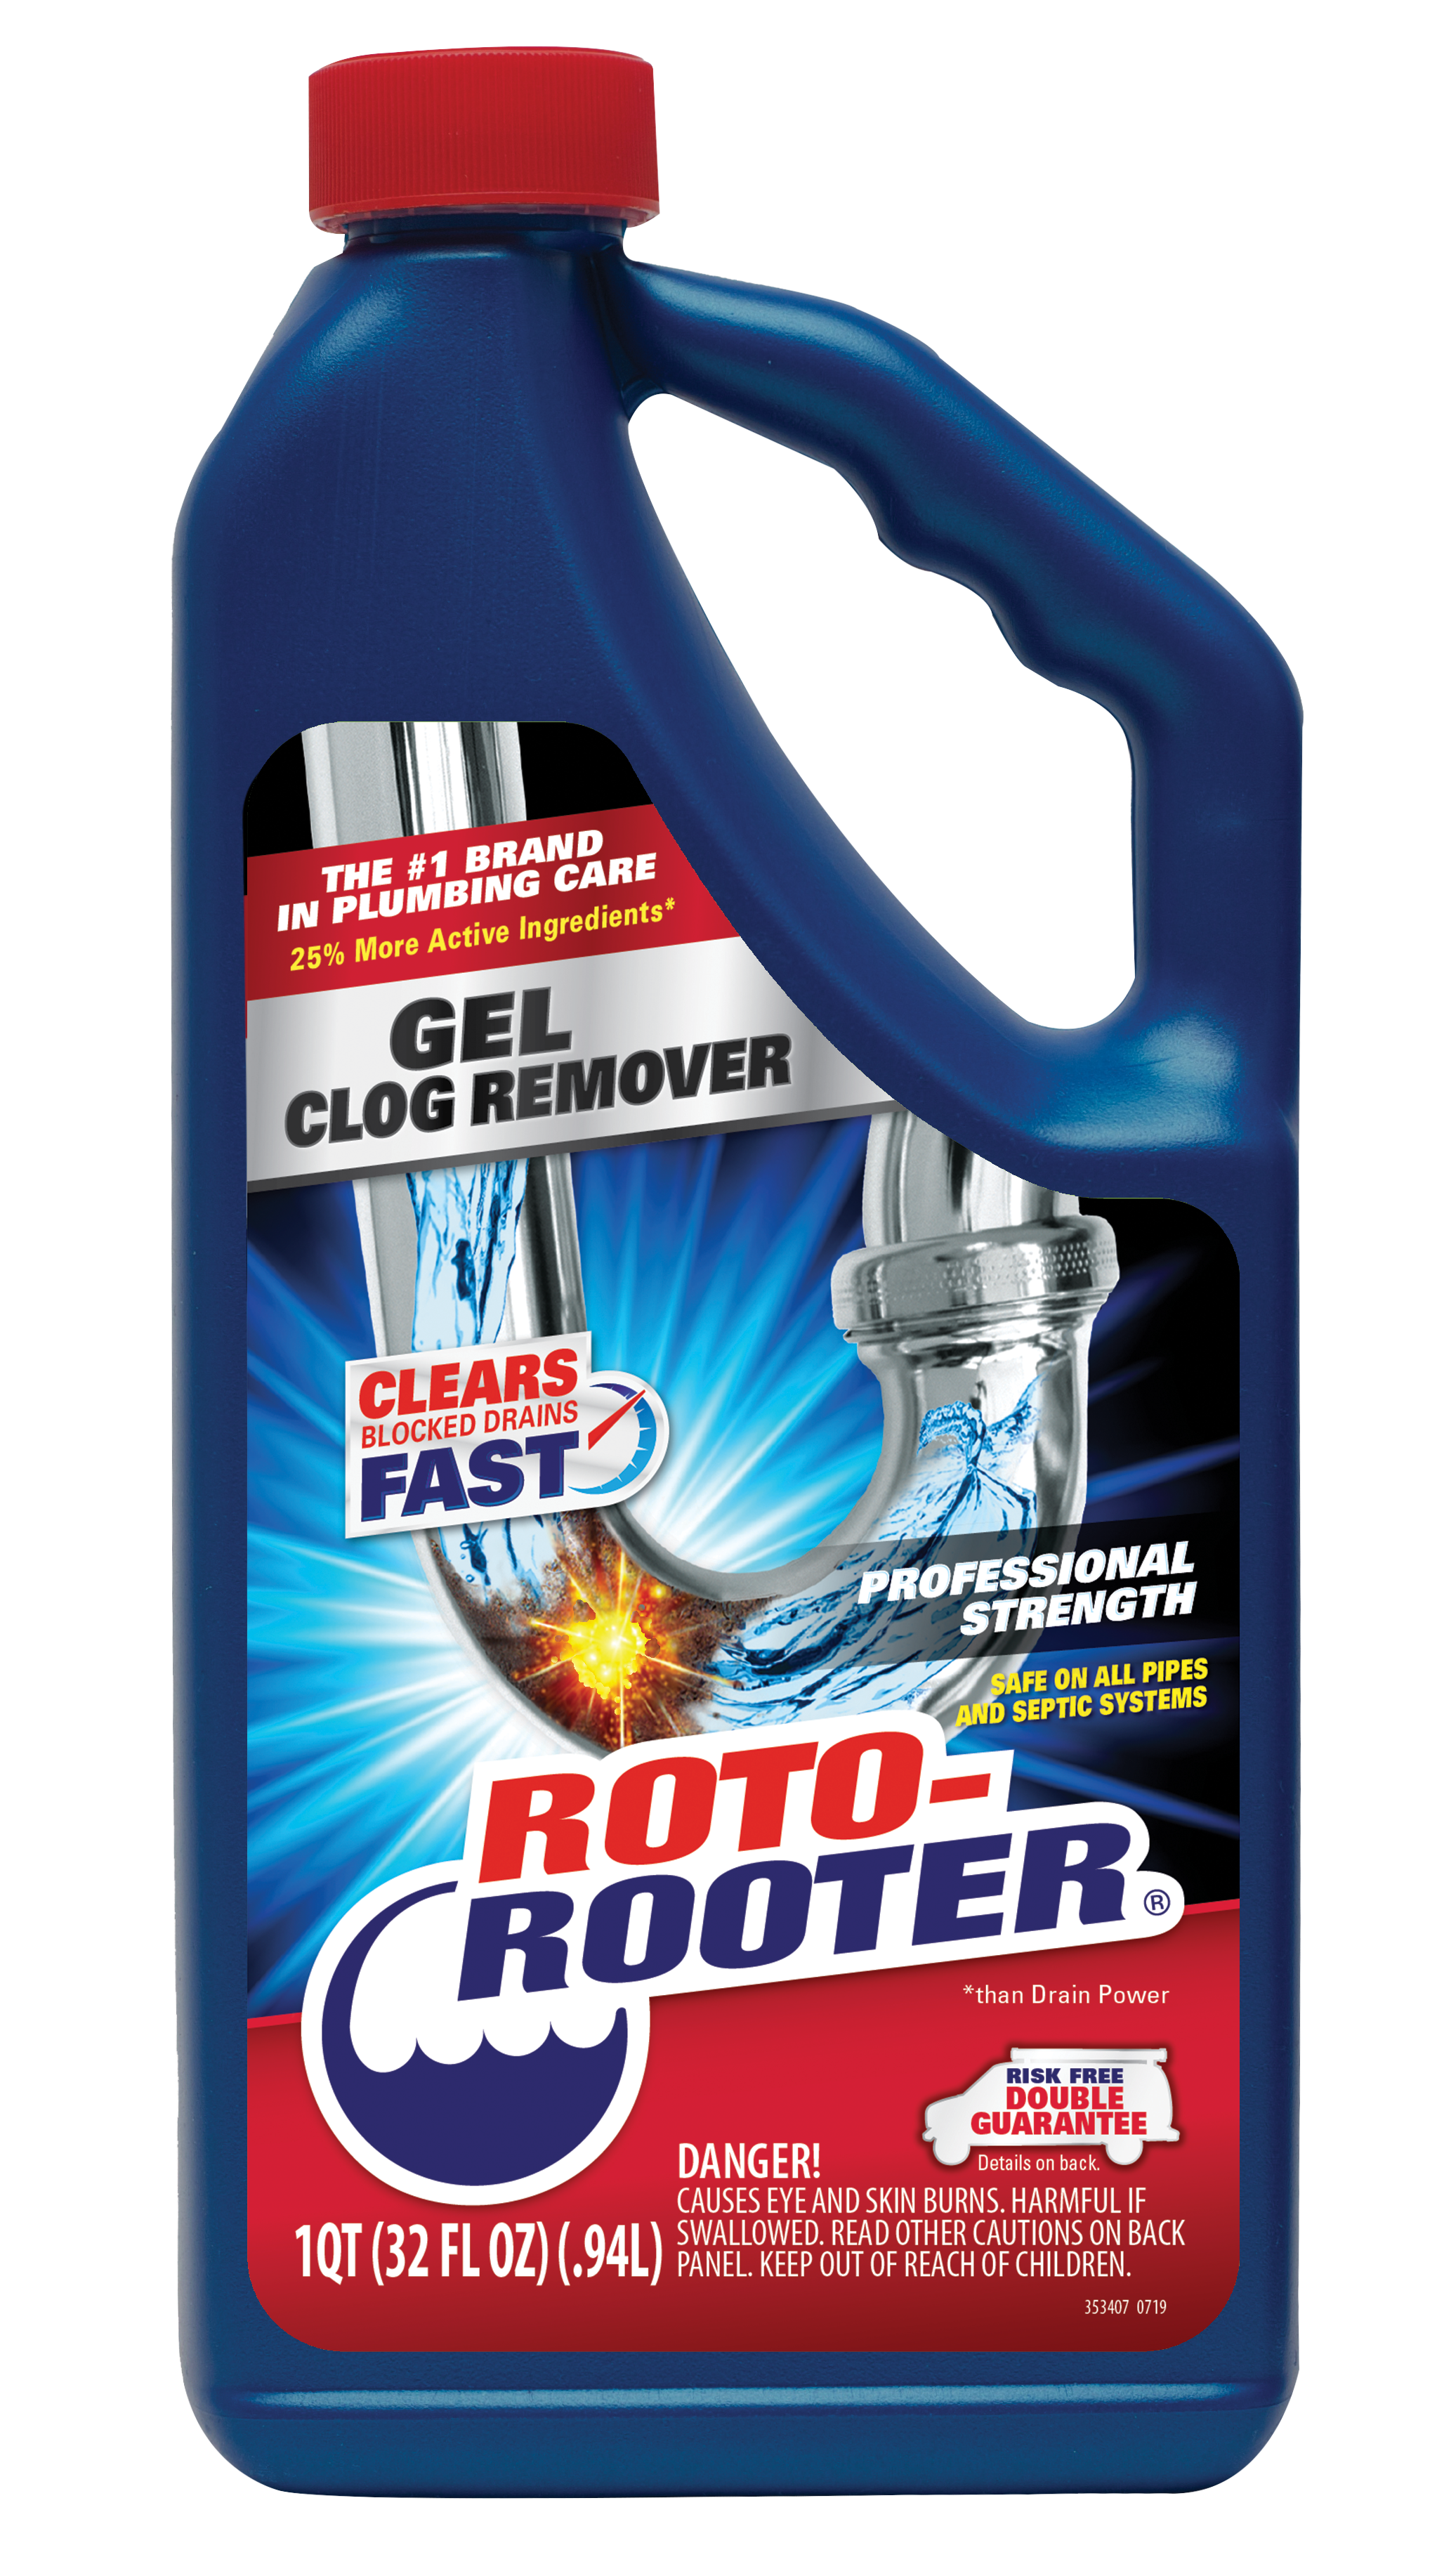 ROTO-ROOTER GEL CLOG REMOVER, 32oz